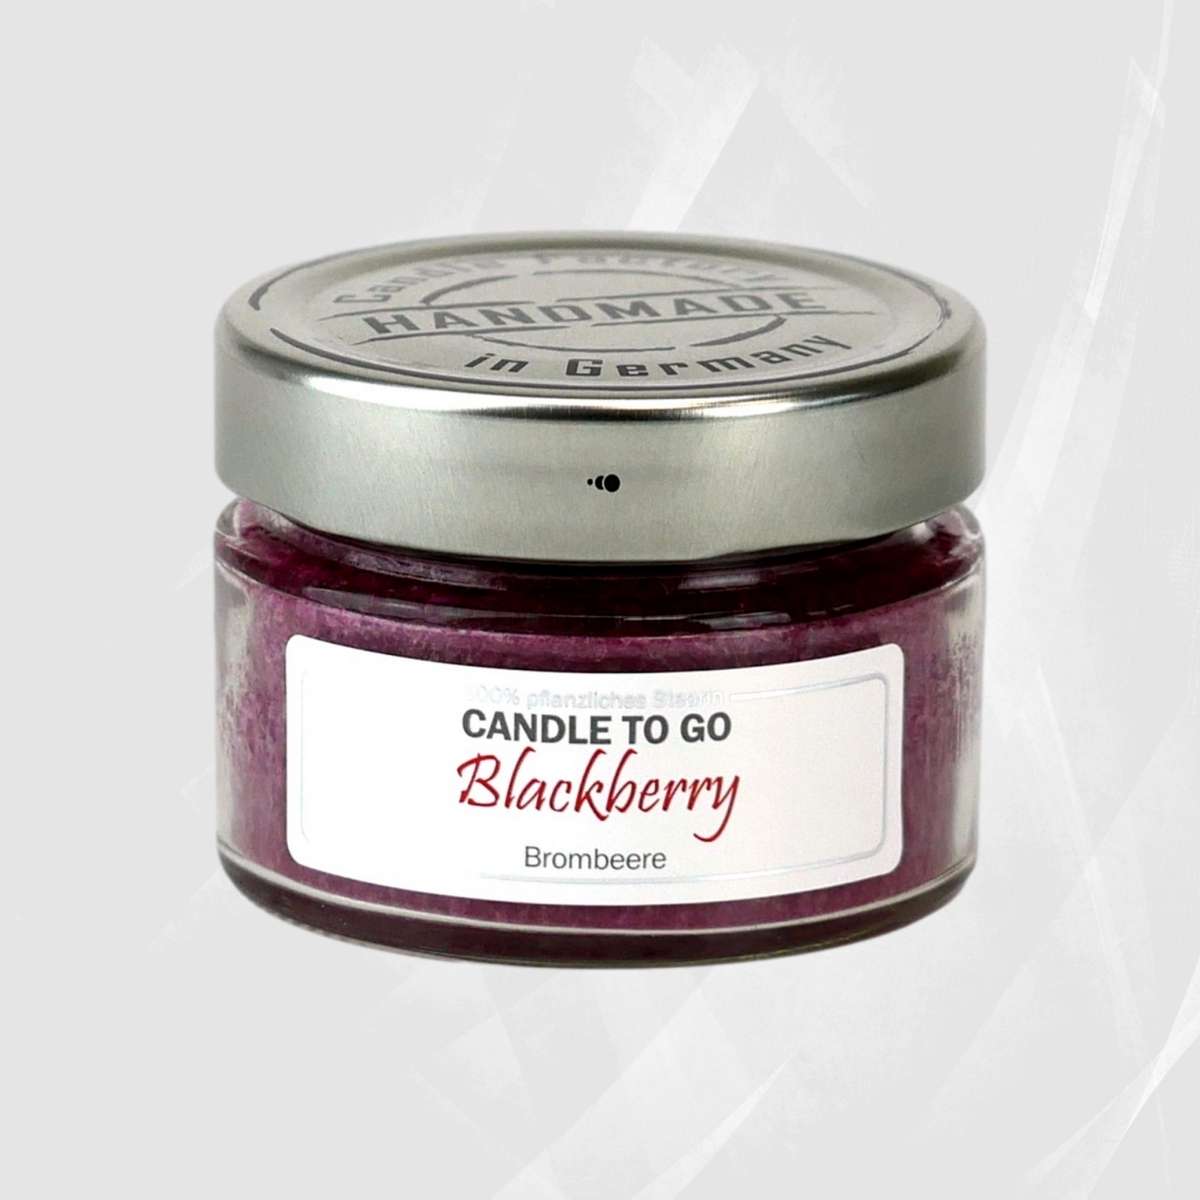 Blackberry - Candle to Go Duftkerze von Candle Factory